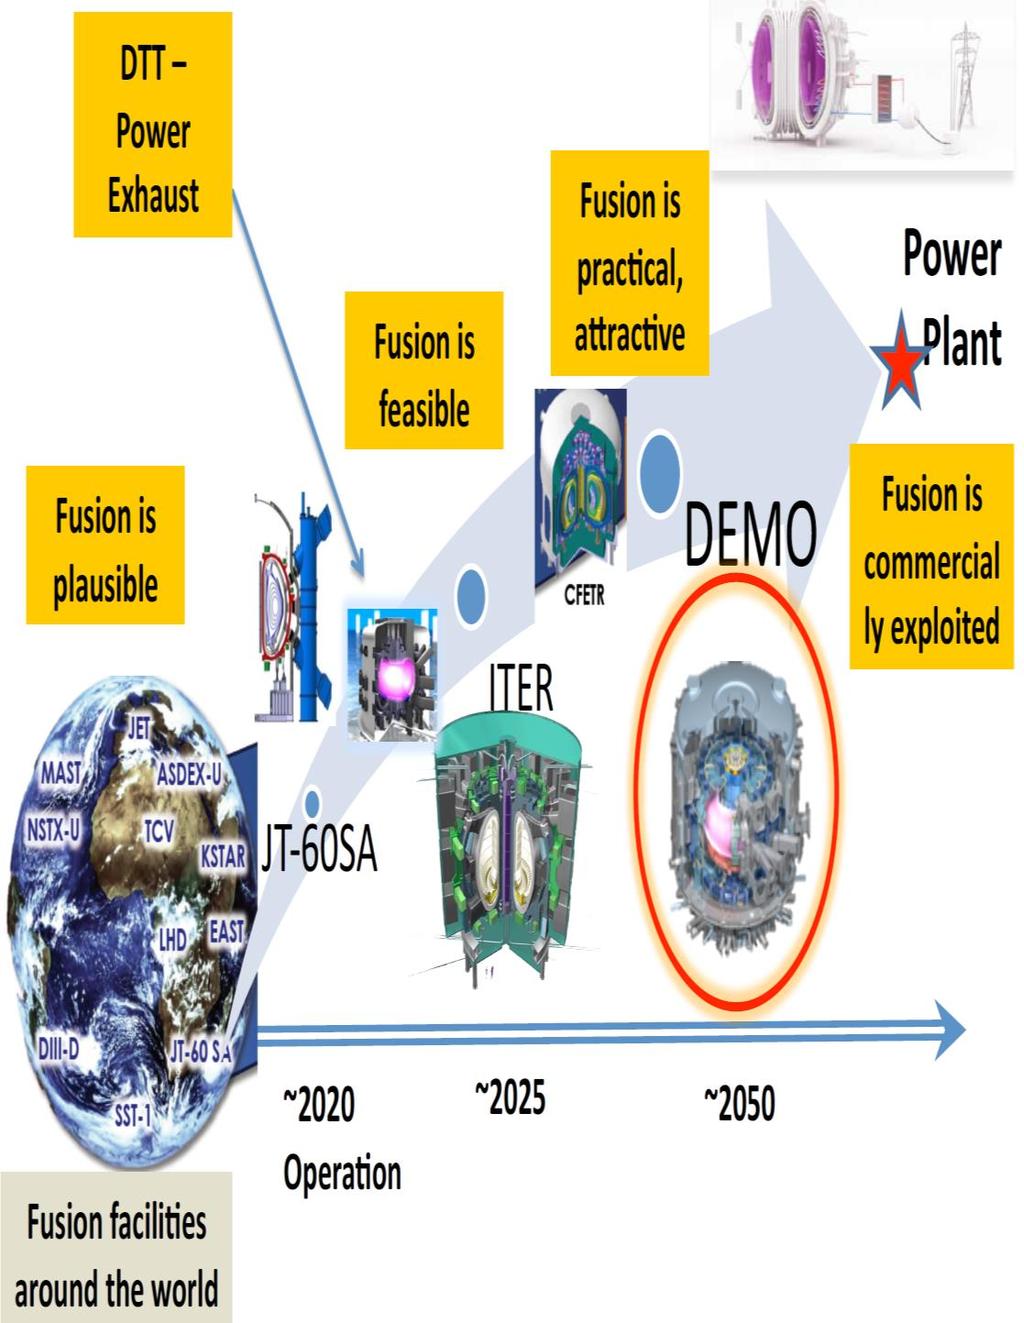 Foreword JET (Since 1983): to study plasma behaviour in conditions and dimensions close to a fusion reactor Including DT Ops JT-60SA : addressing key physics issues for ITER and DEMO noninductive